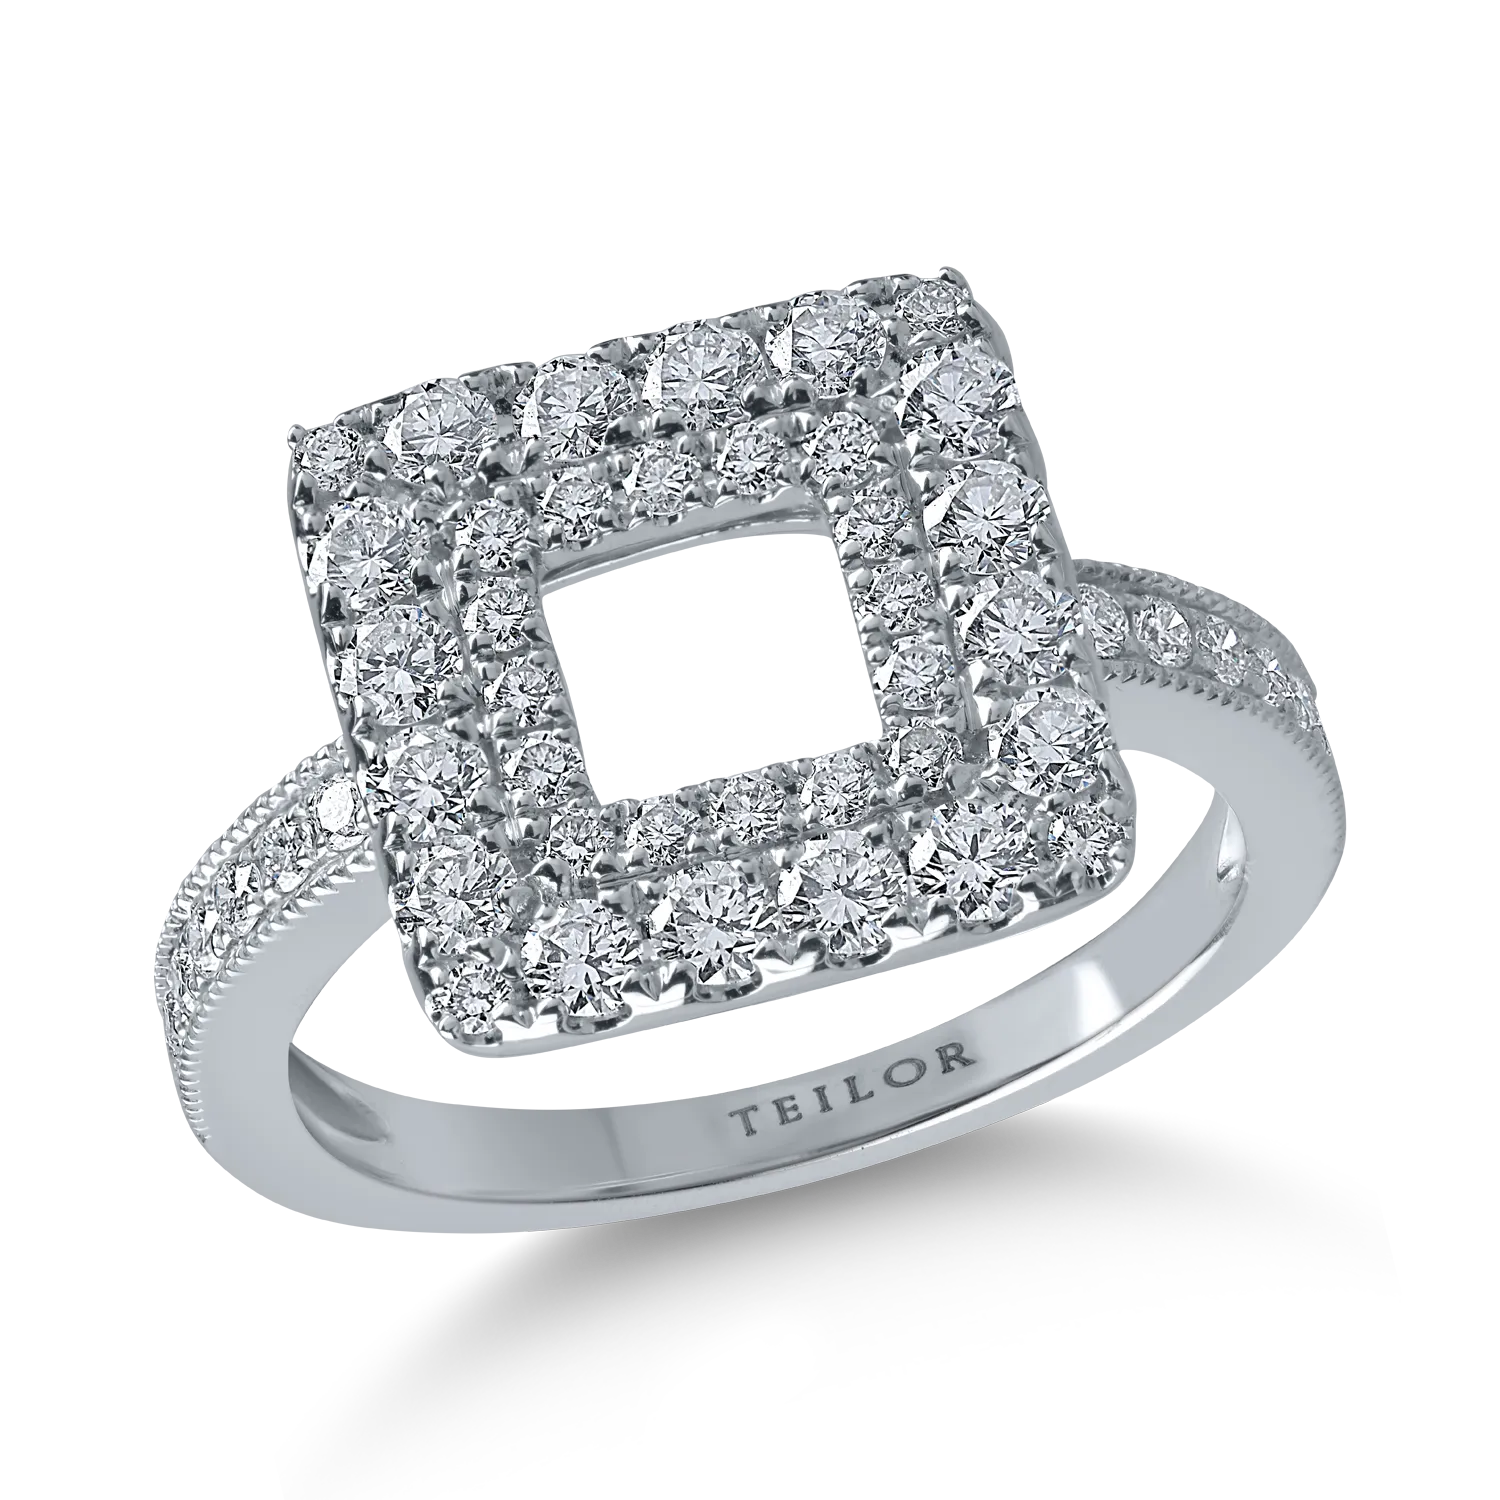 White gold ring with 1ct diamonds